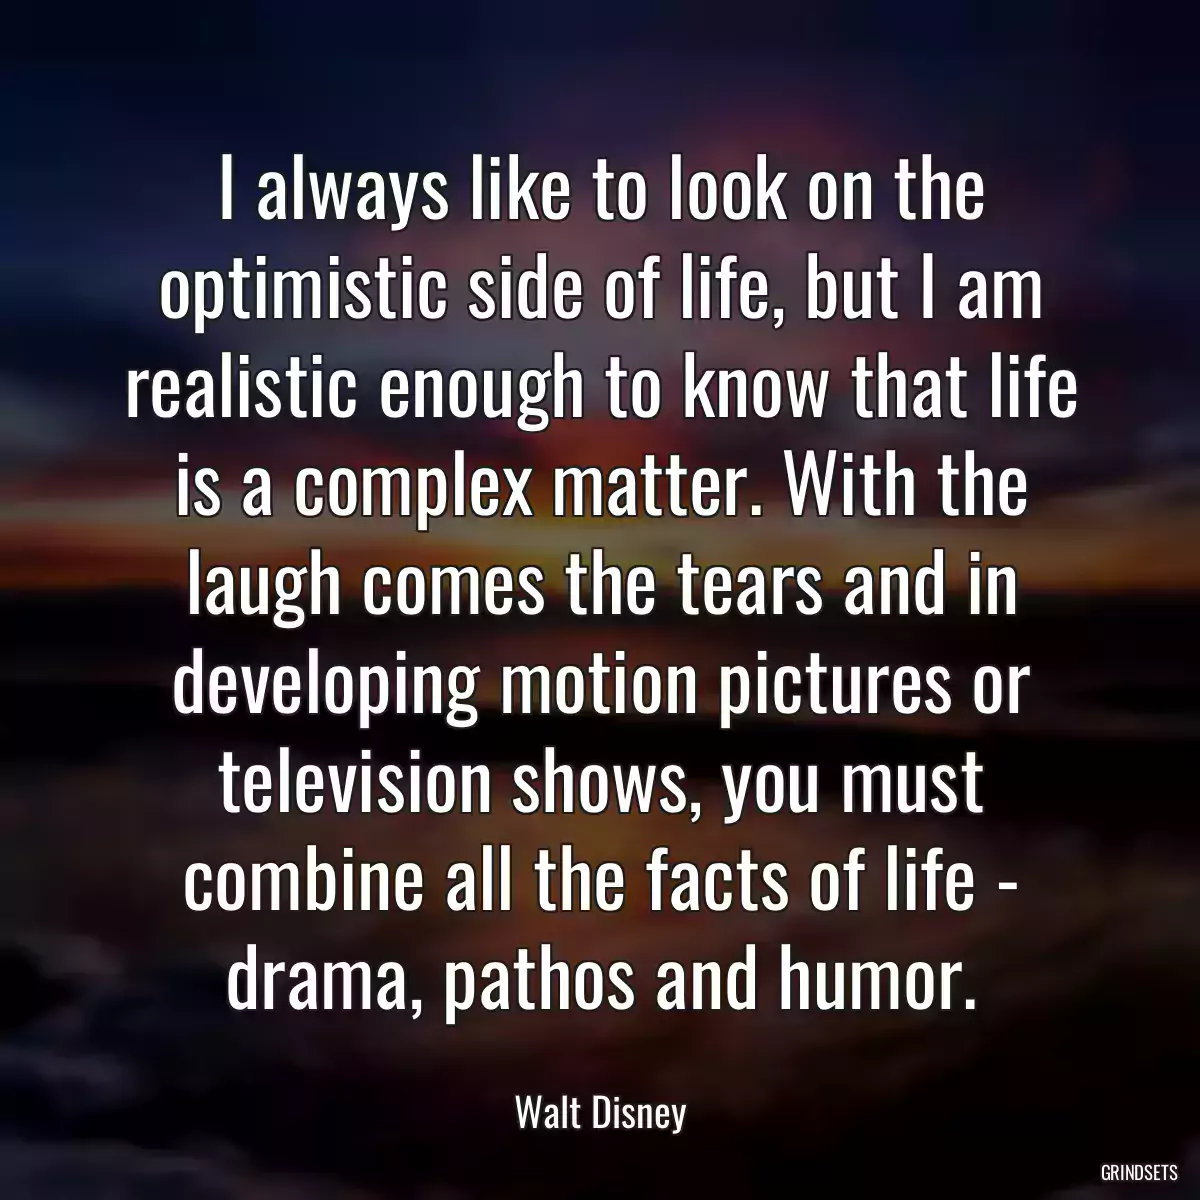 I always like to look on the optimistic side of life, but I am realistic enough to know that life is a complex matter. With the laugh comes the tears and in developing motion pictures or television shows, you must combine all the facts of life - drama, pathos and humor.